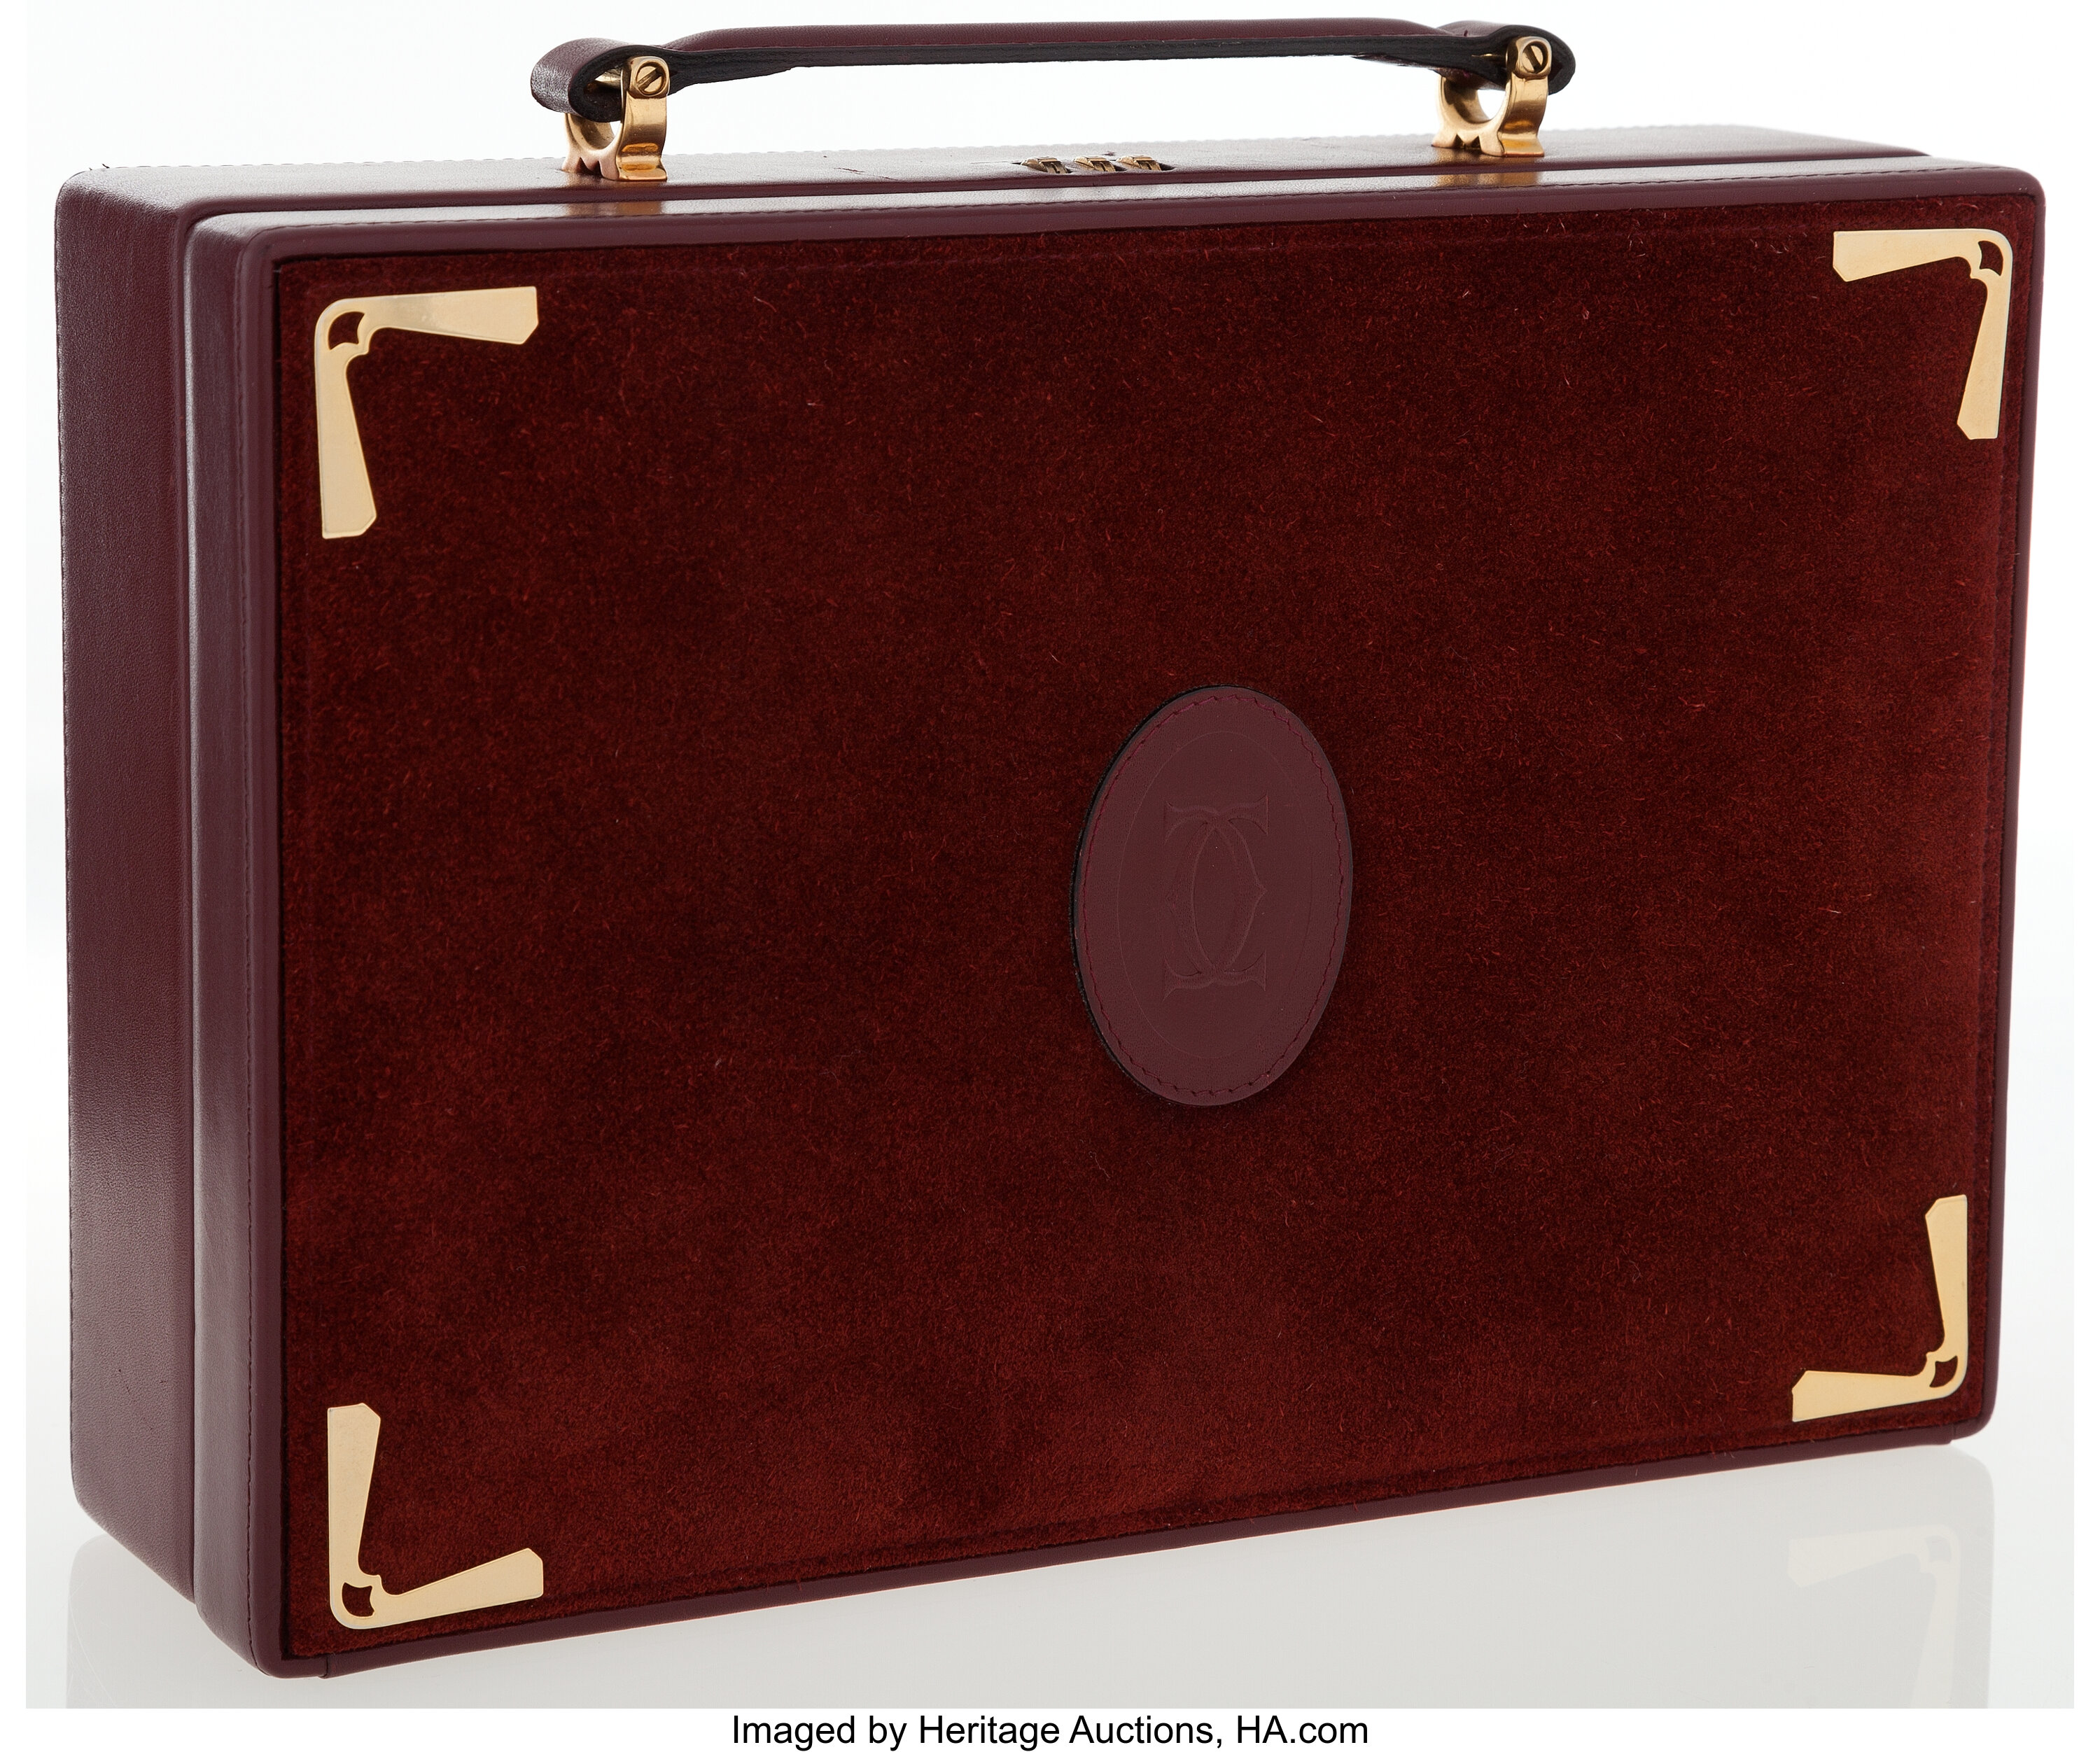 Large Travel Jewellery Case in Burgundy